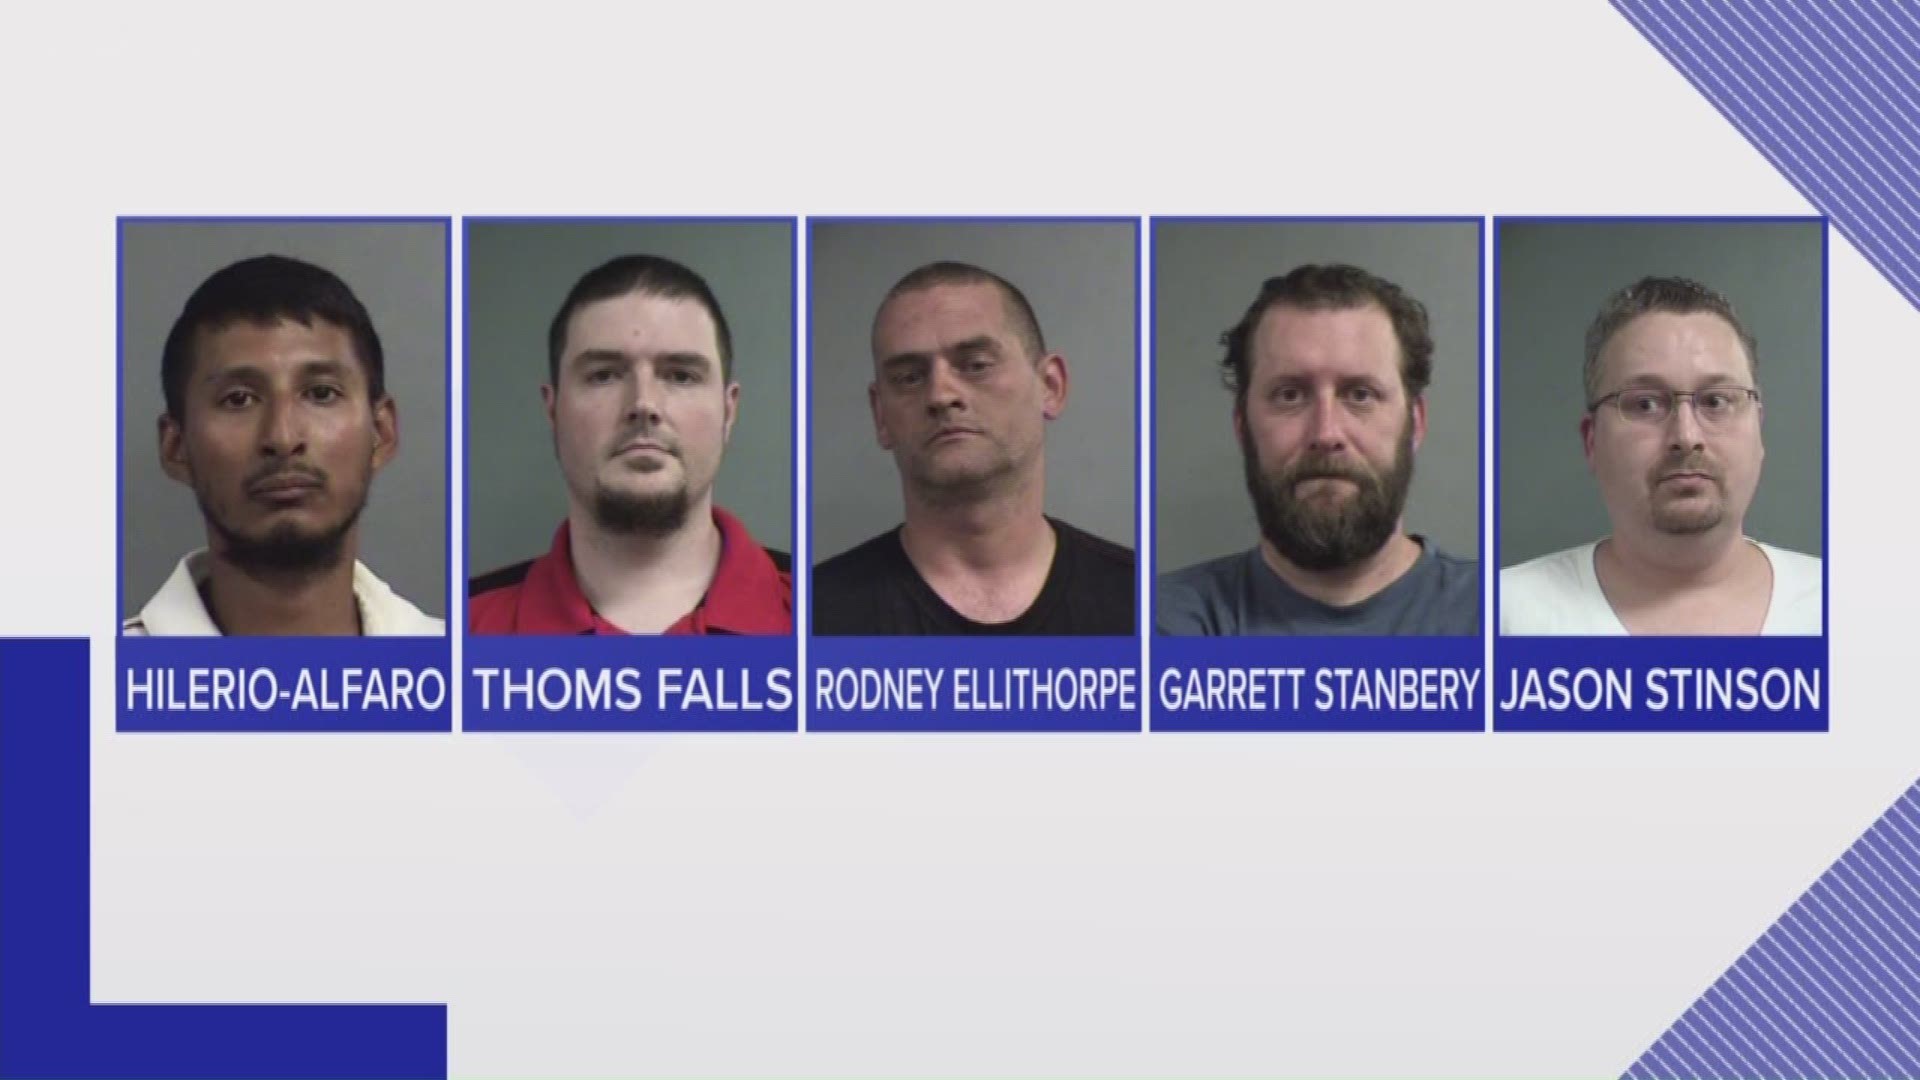 Police say five men were arrested after they tried to arrange sex with a 16-year-old.